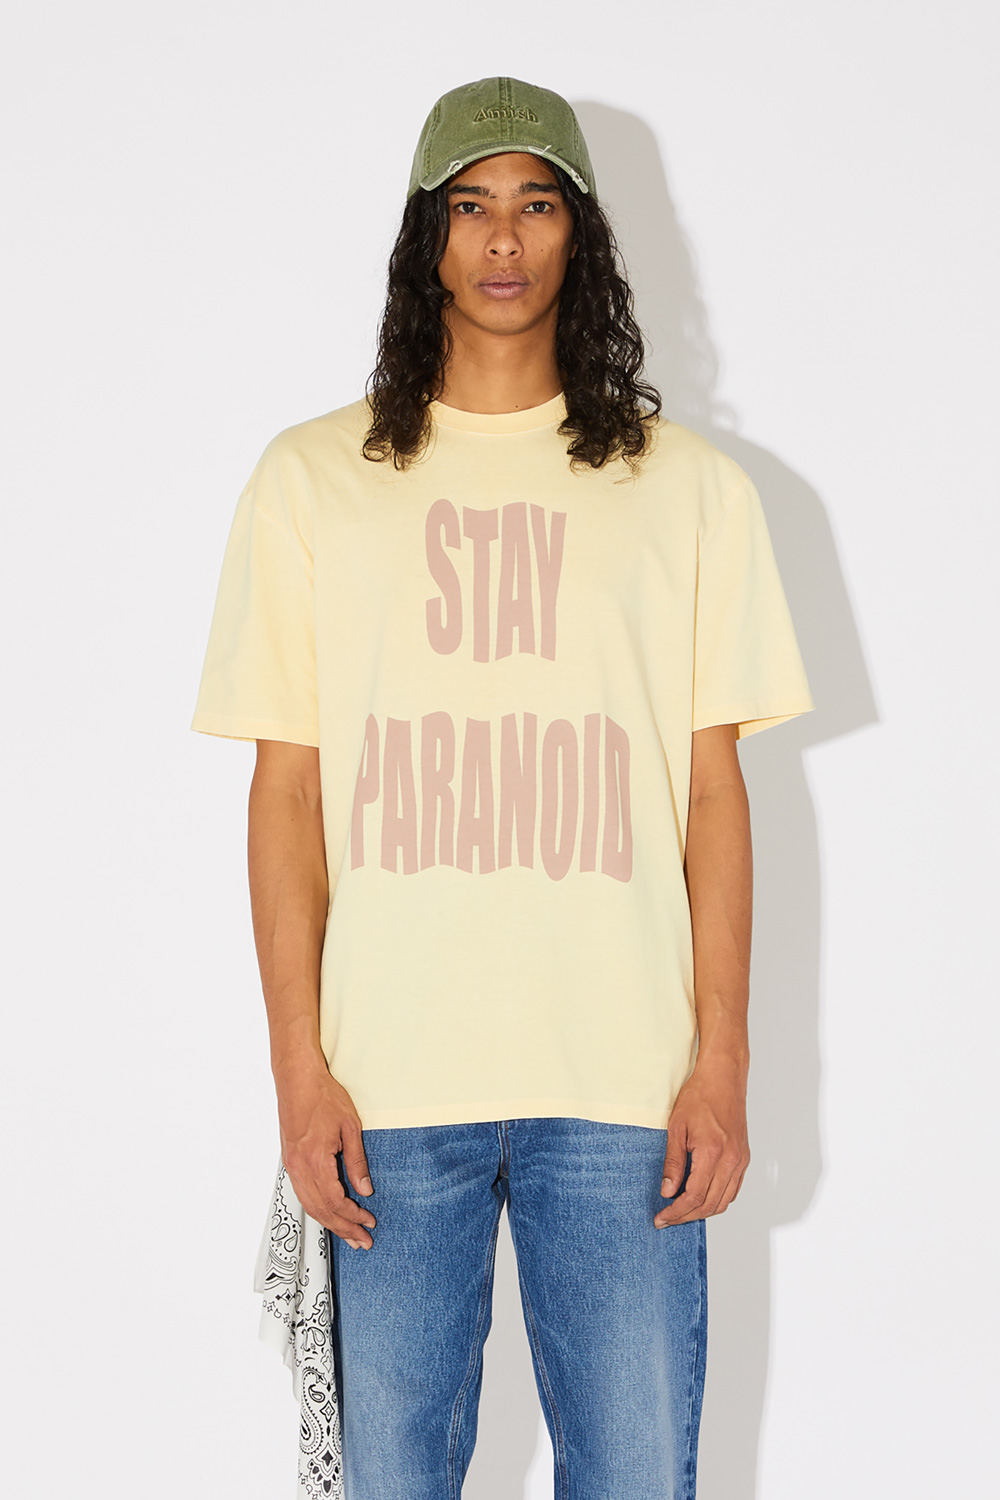 AMISH: CREW NECK T-SHIRT WITH STAY PARANOID PRINT